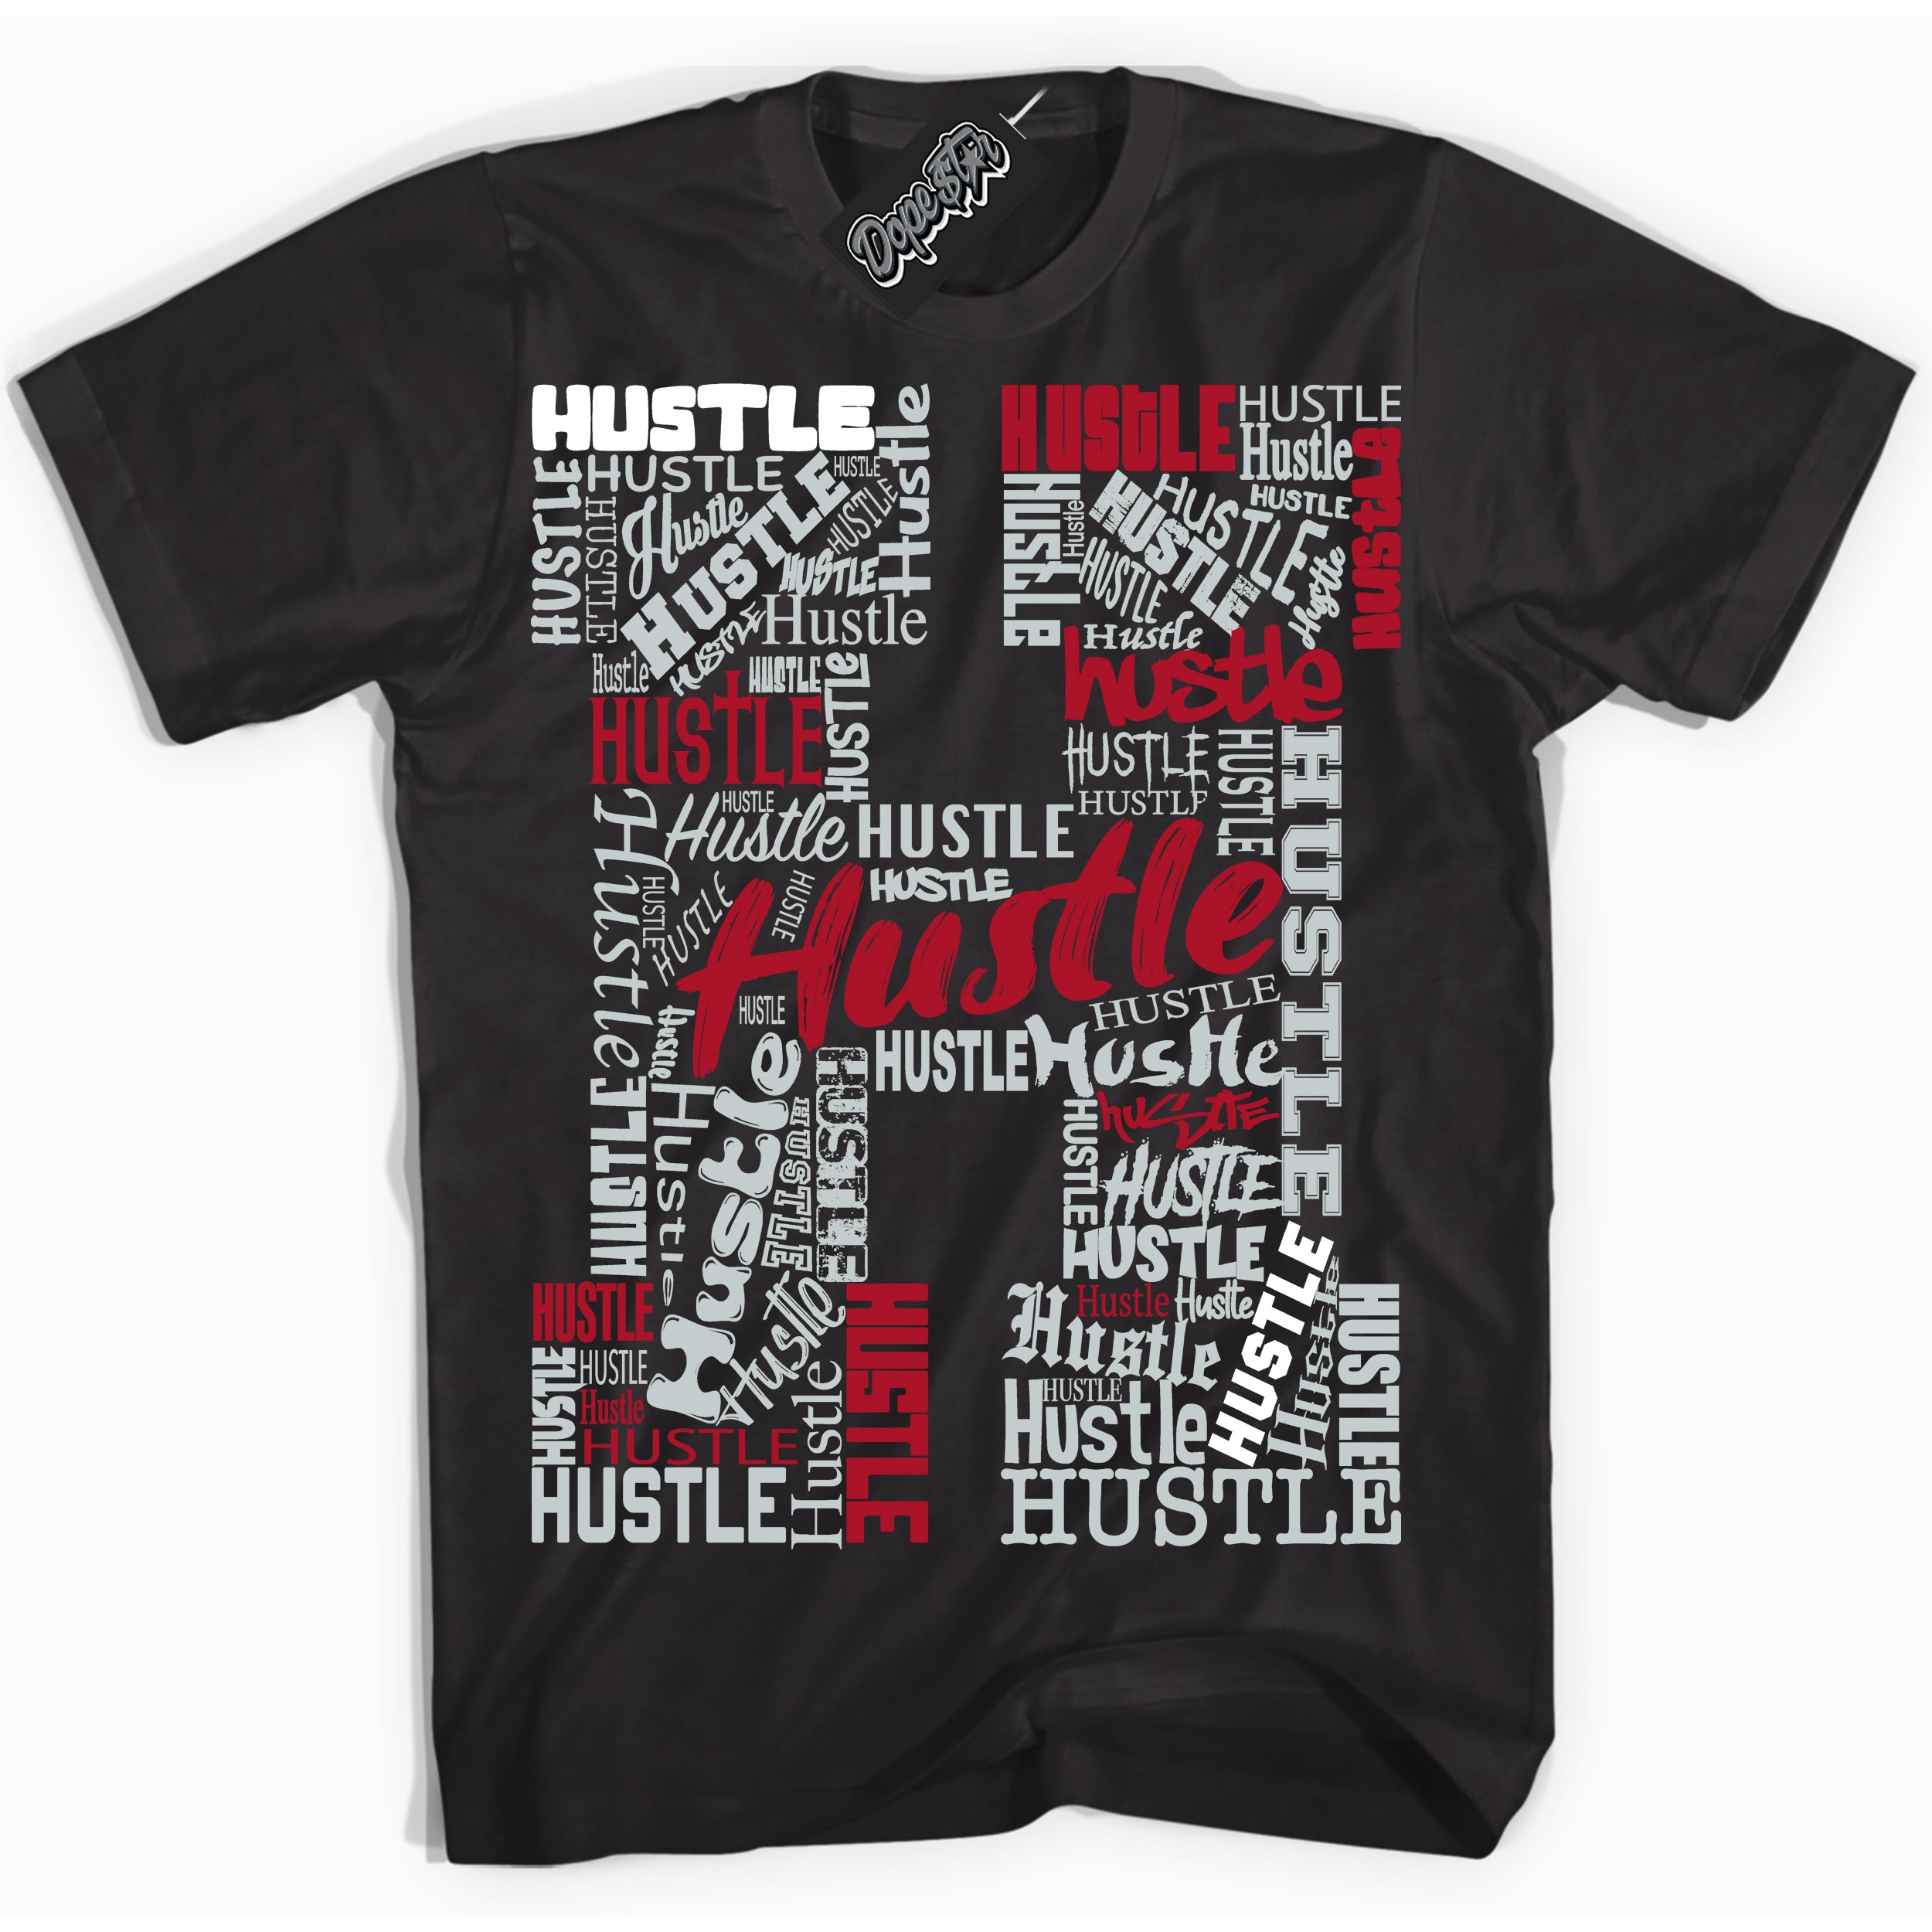 Cool Black Shirt with “ Hustle H” design that perfectly matches Reverse Ultraman Sneakers.